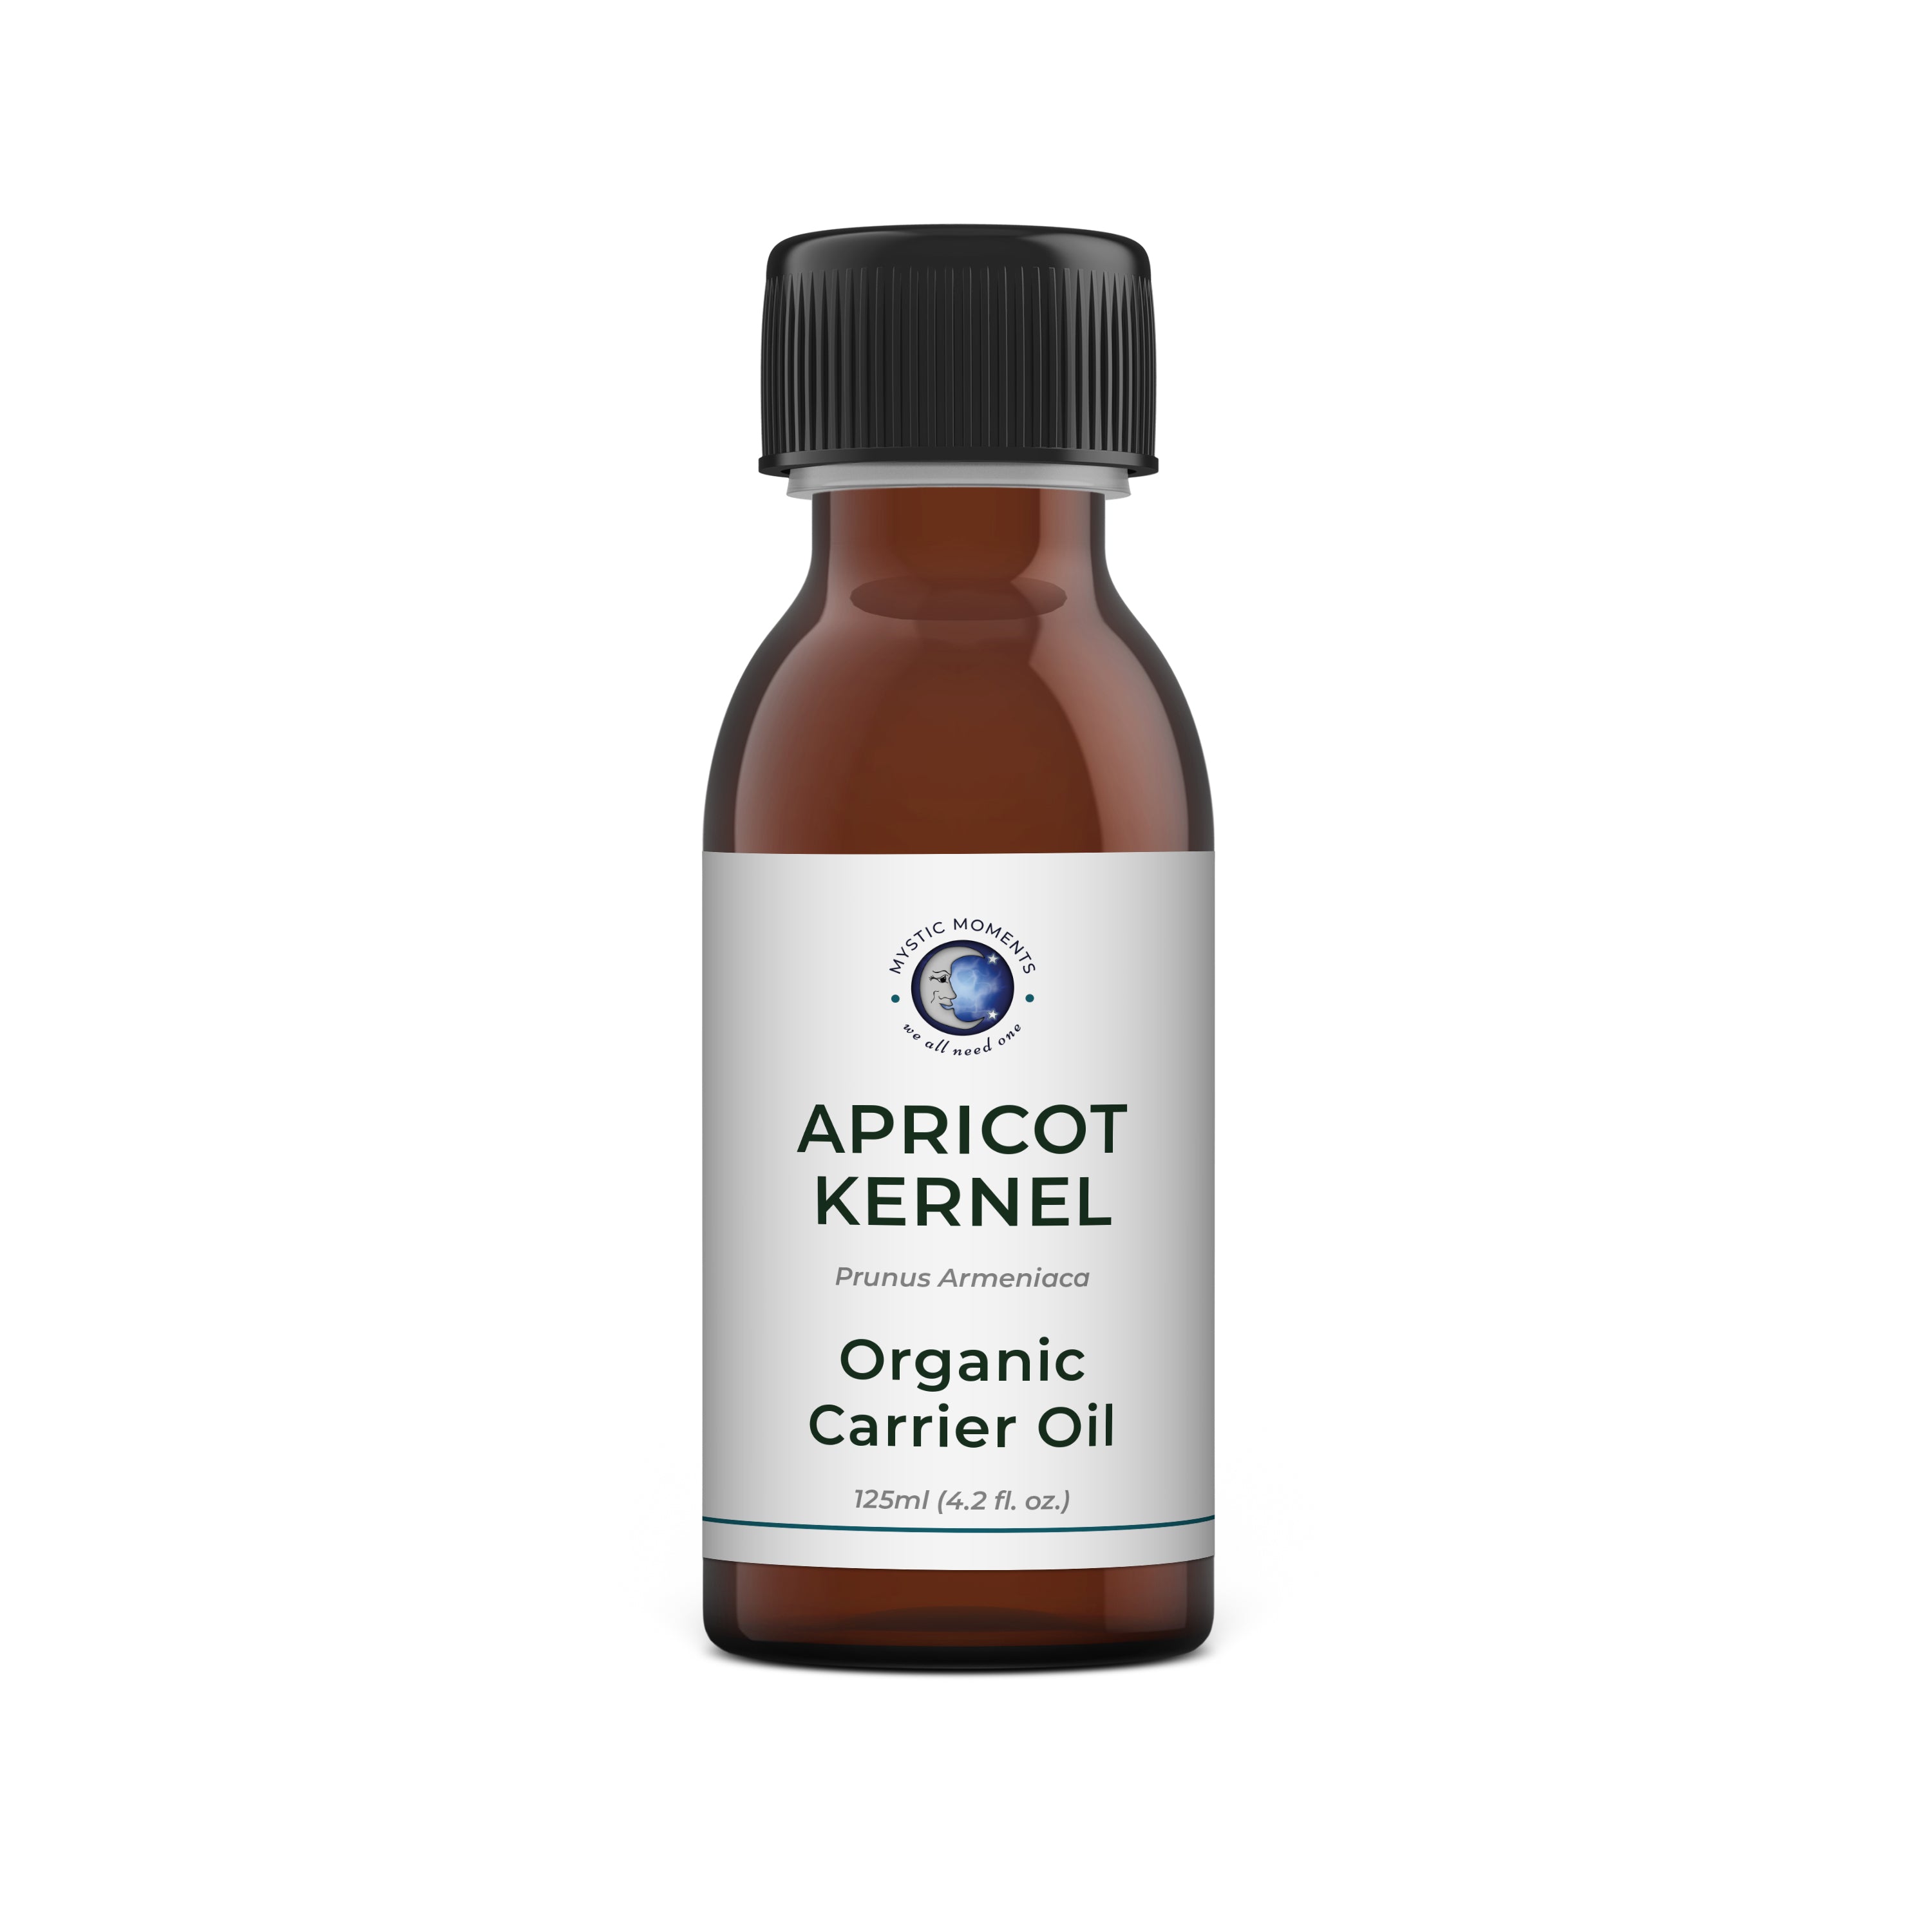 Apricot Kernel Organic Carrier Oil